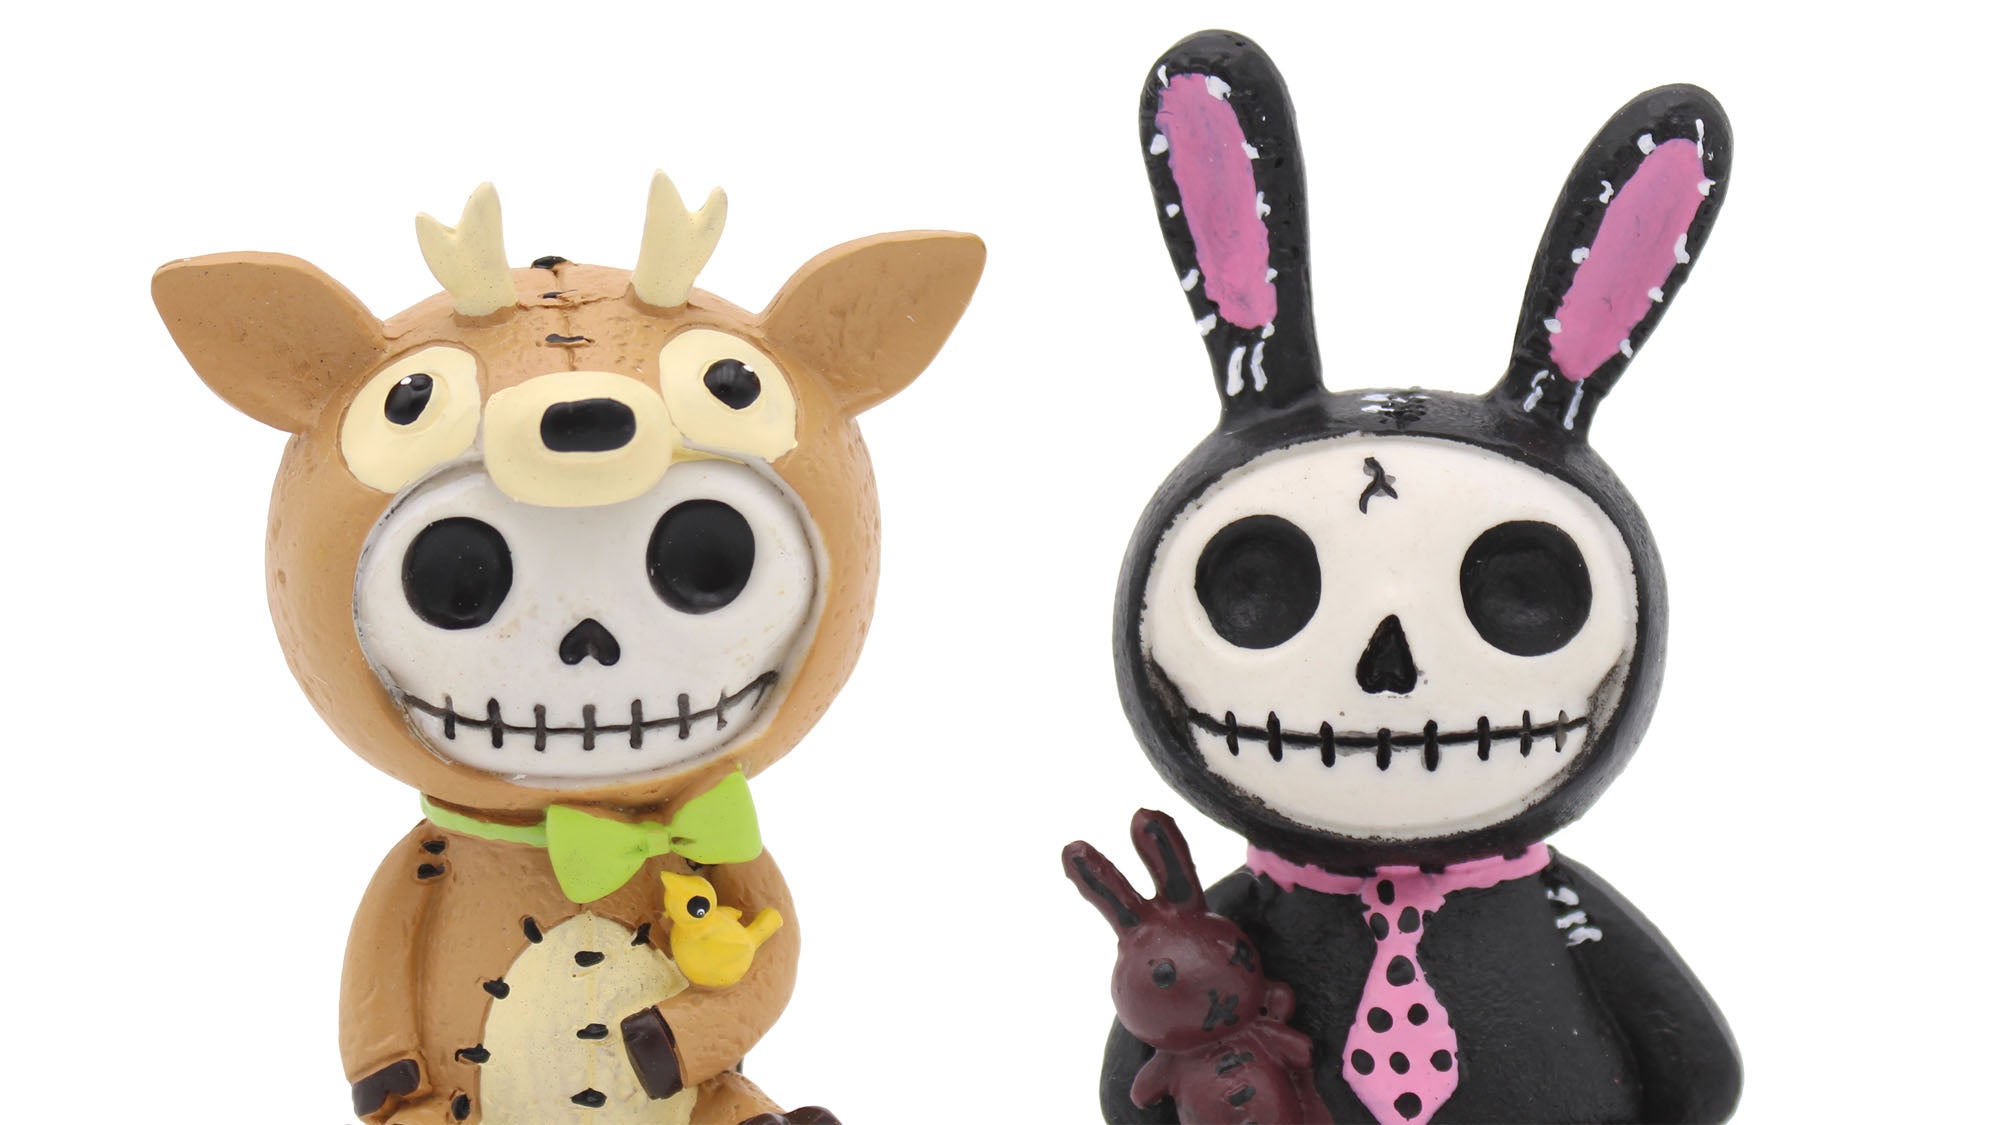 Skeletons with a Twist: The Furrybones Collectible Collection Unveiled! - Haiku POP